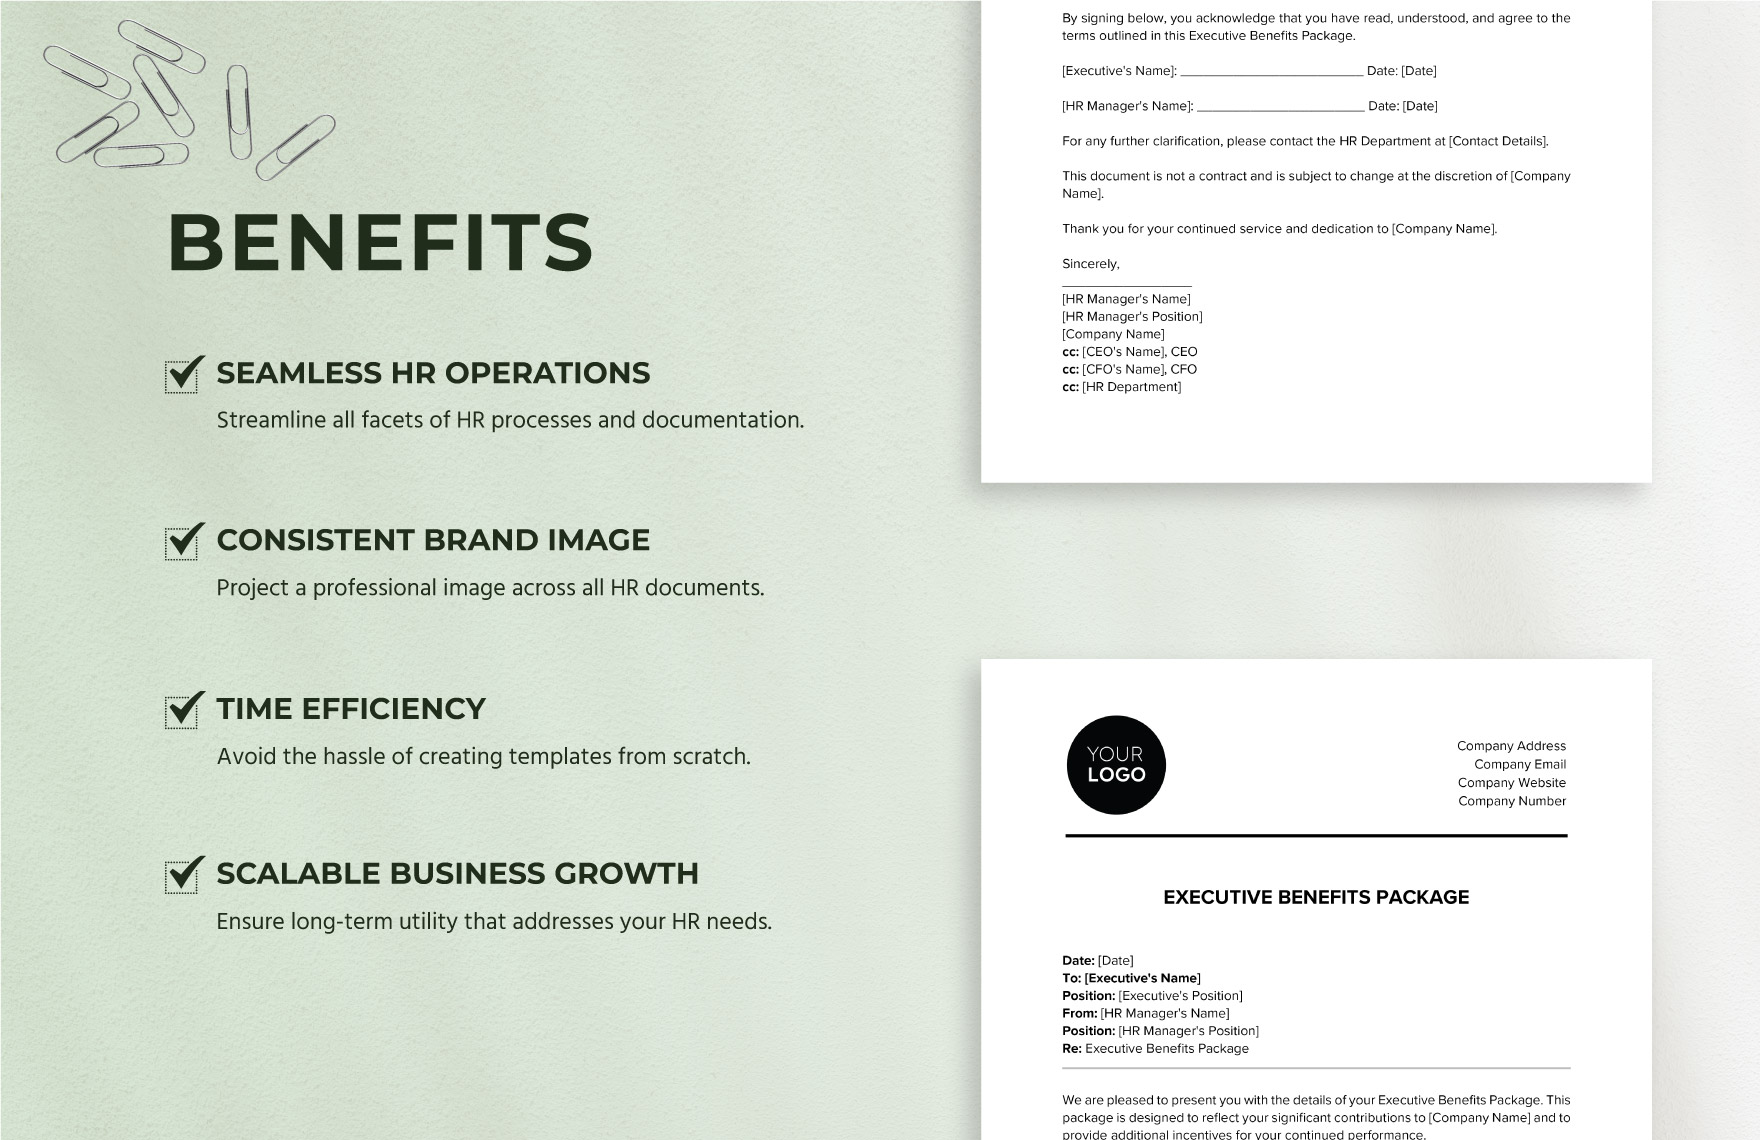 Executive Benefits Package HR Template